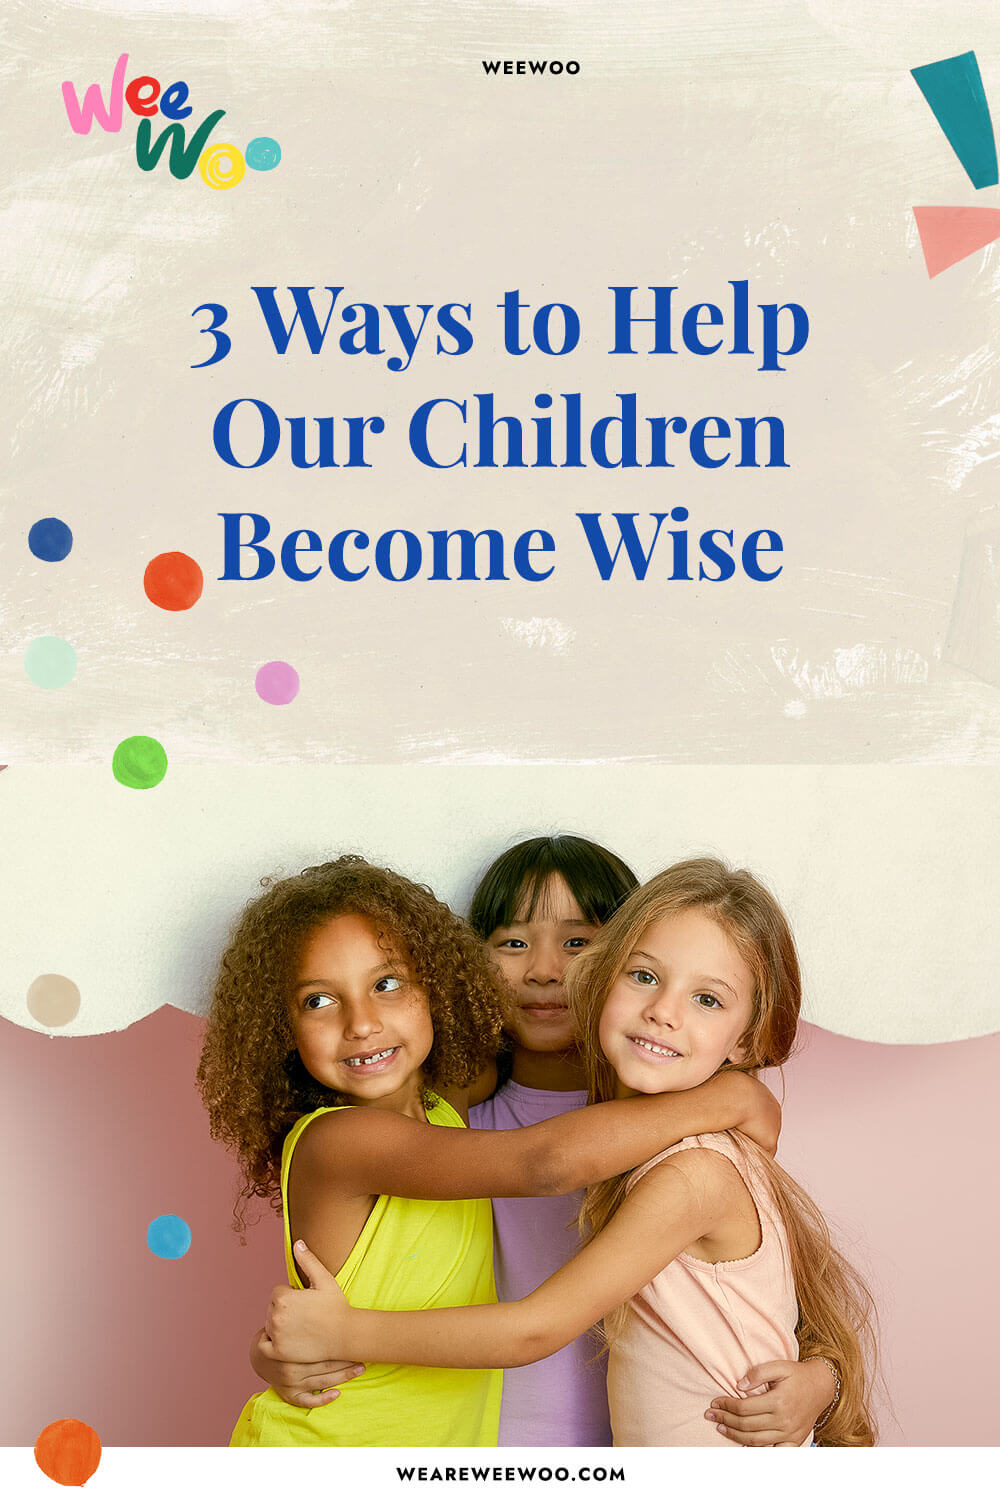 3 Ways to Help Our Children Become Wise